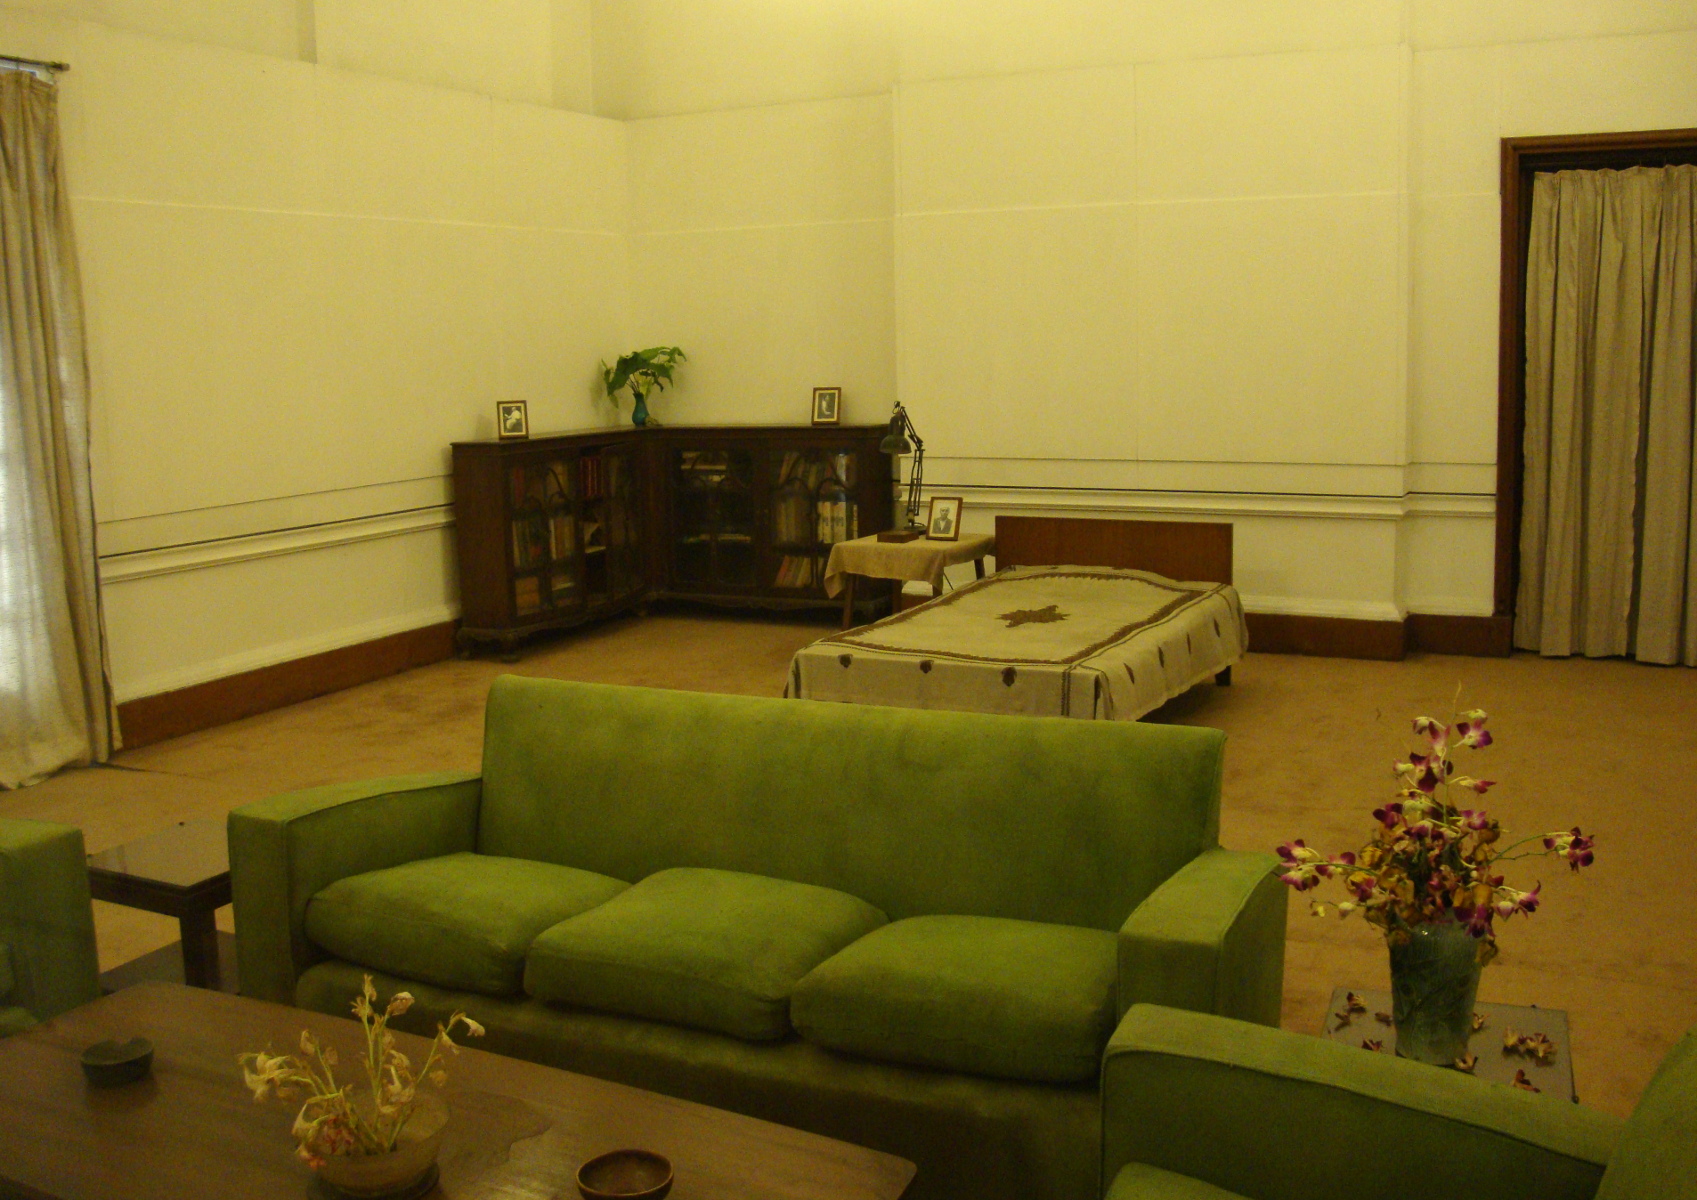 The bedroom that Nehru's daughter Indira Gandhi used when she stayed at Teen Murti Bhawan.